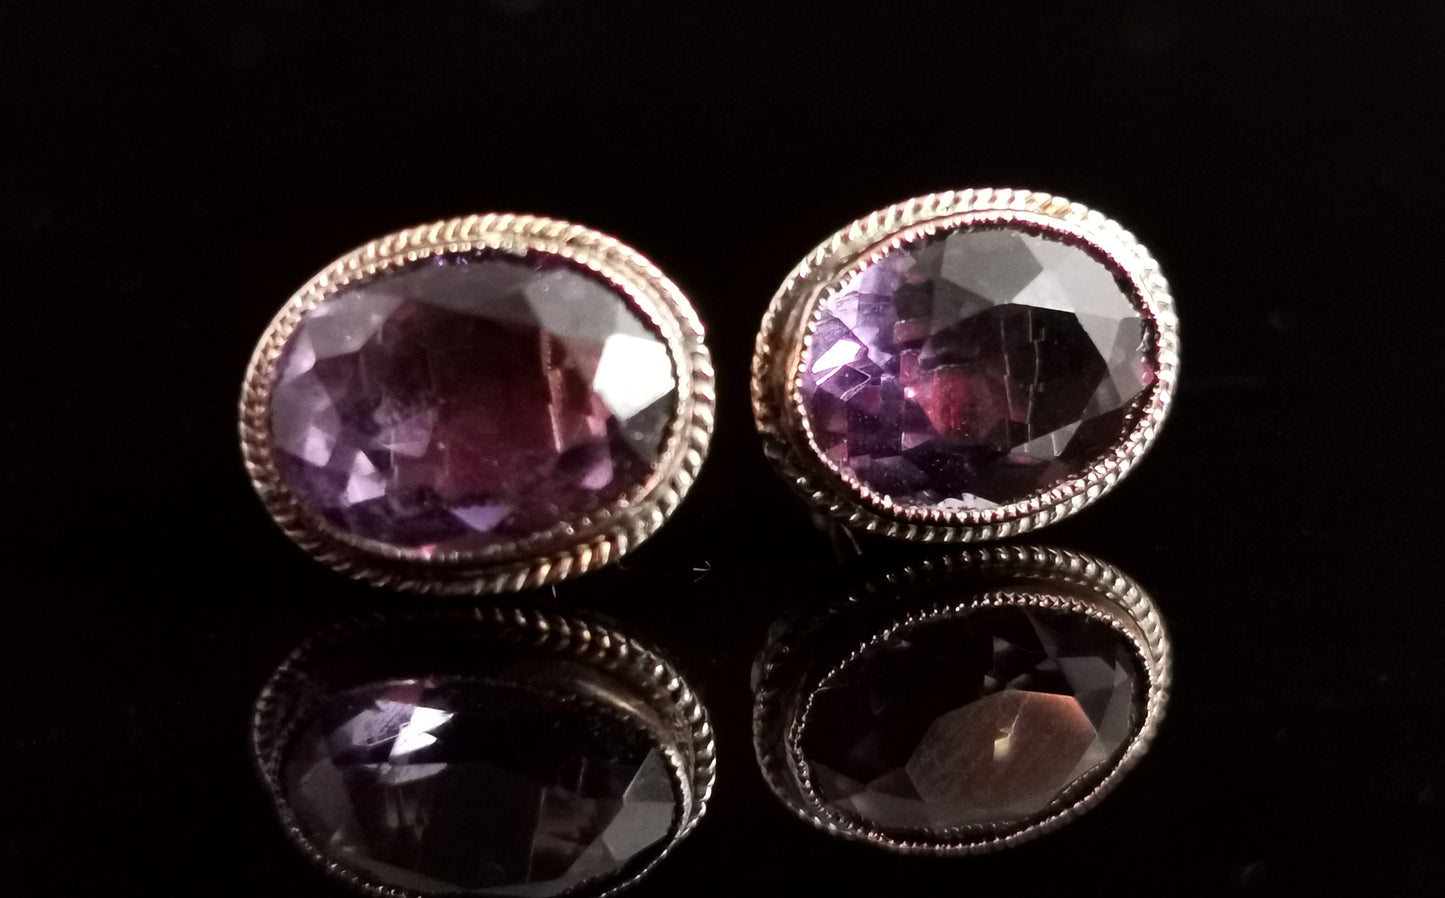 Antique Victorian 9ct gold Amethyst stud earrings